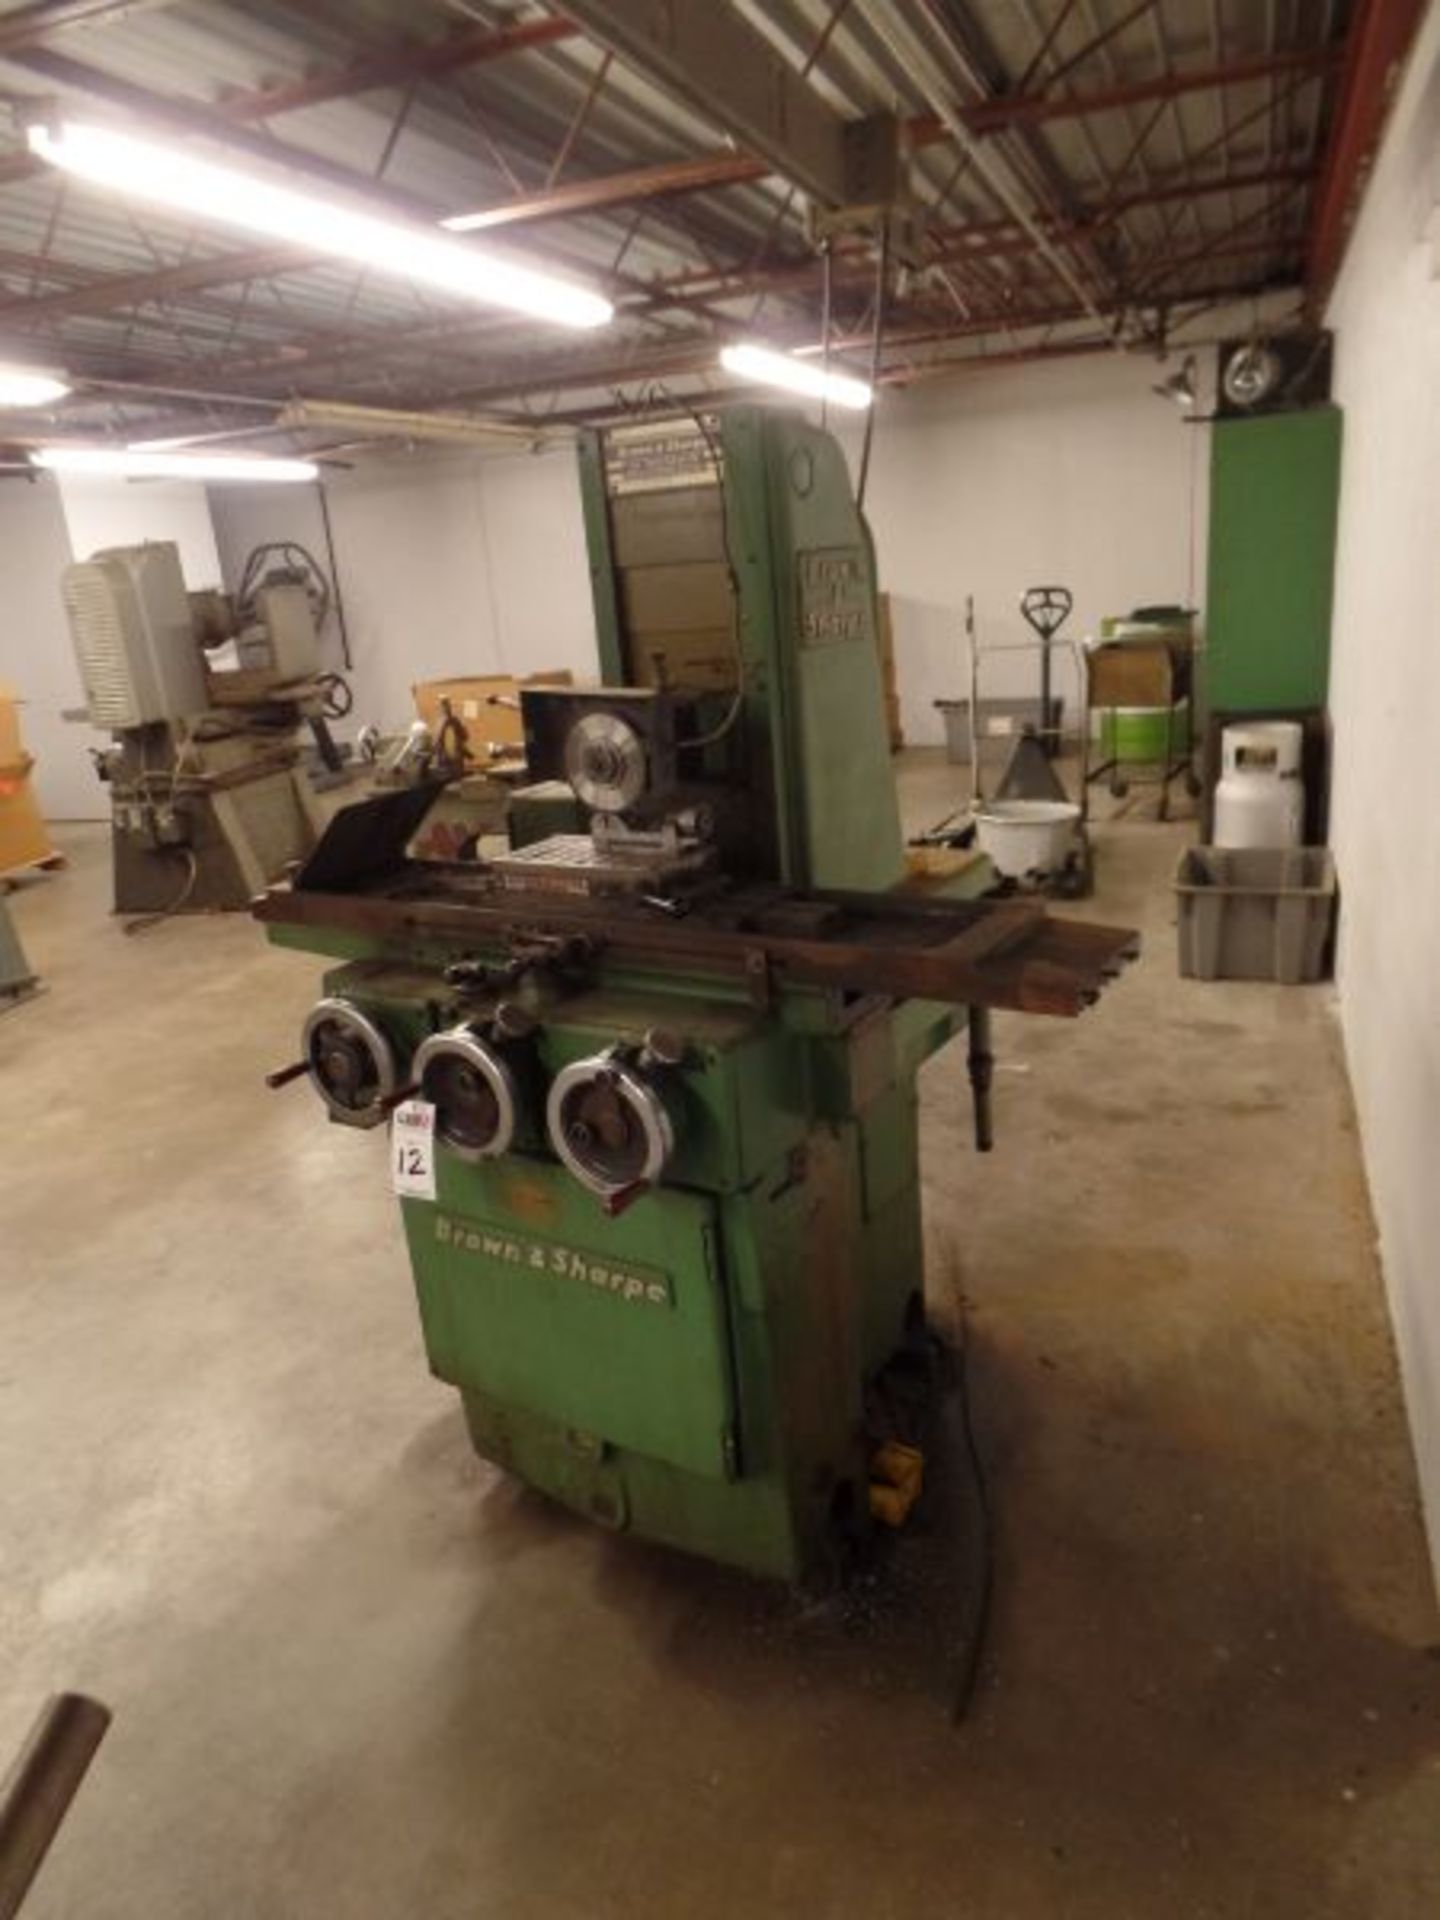 Brown & Sharpe 618 Micromaster Hyd. Surface Grinder, 6"x18" Magnetic Chuck, S/N 523-6181-797 - Image 3 of 10